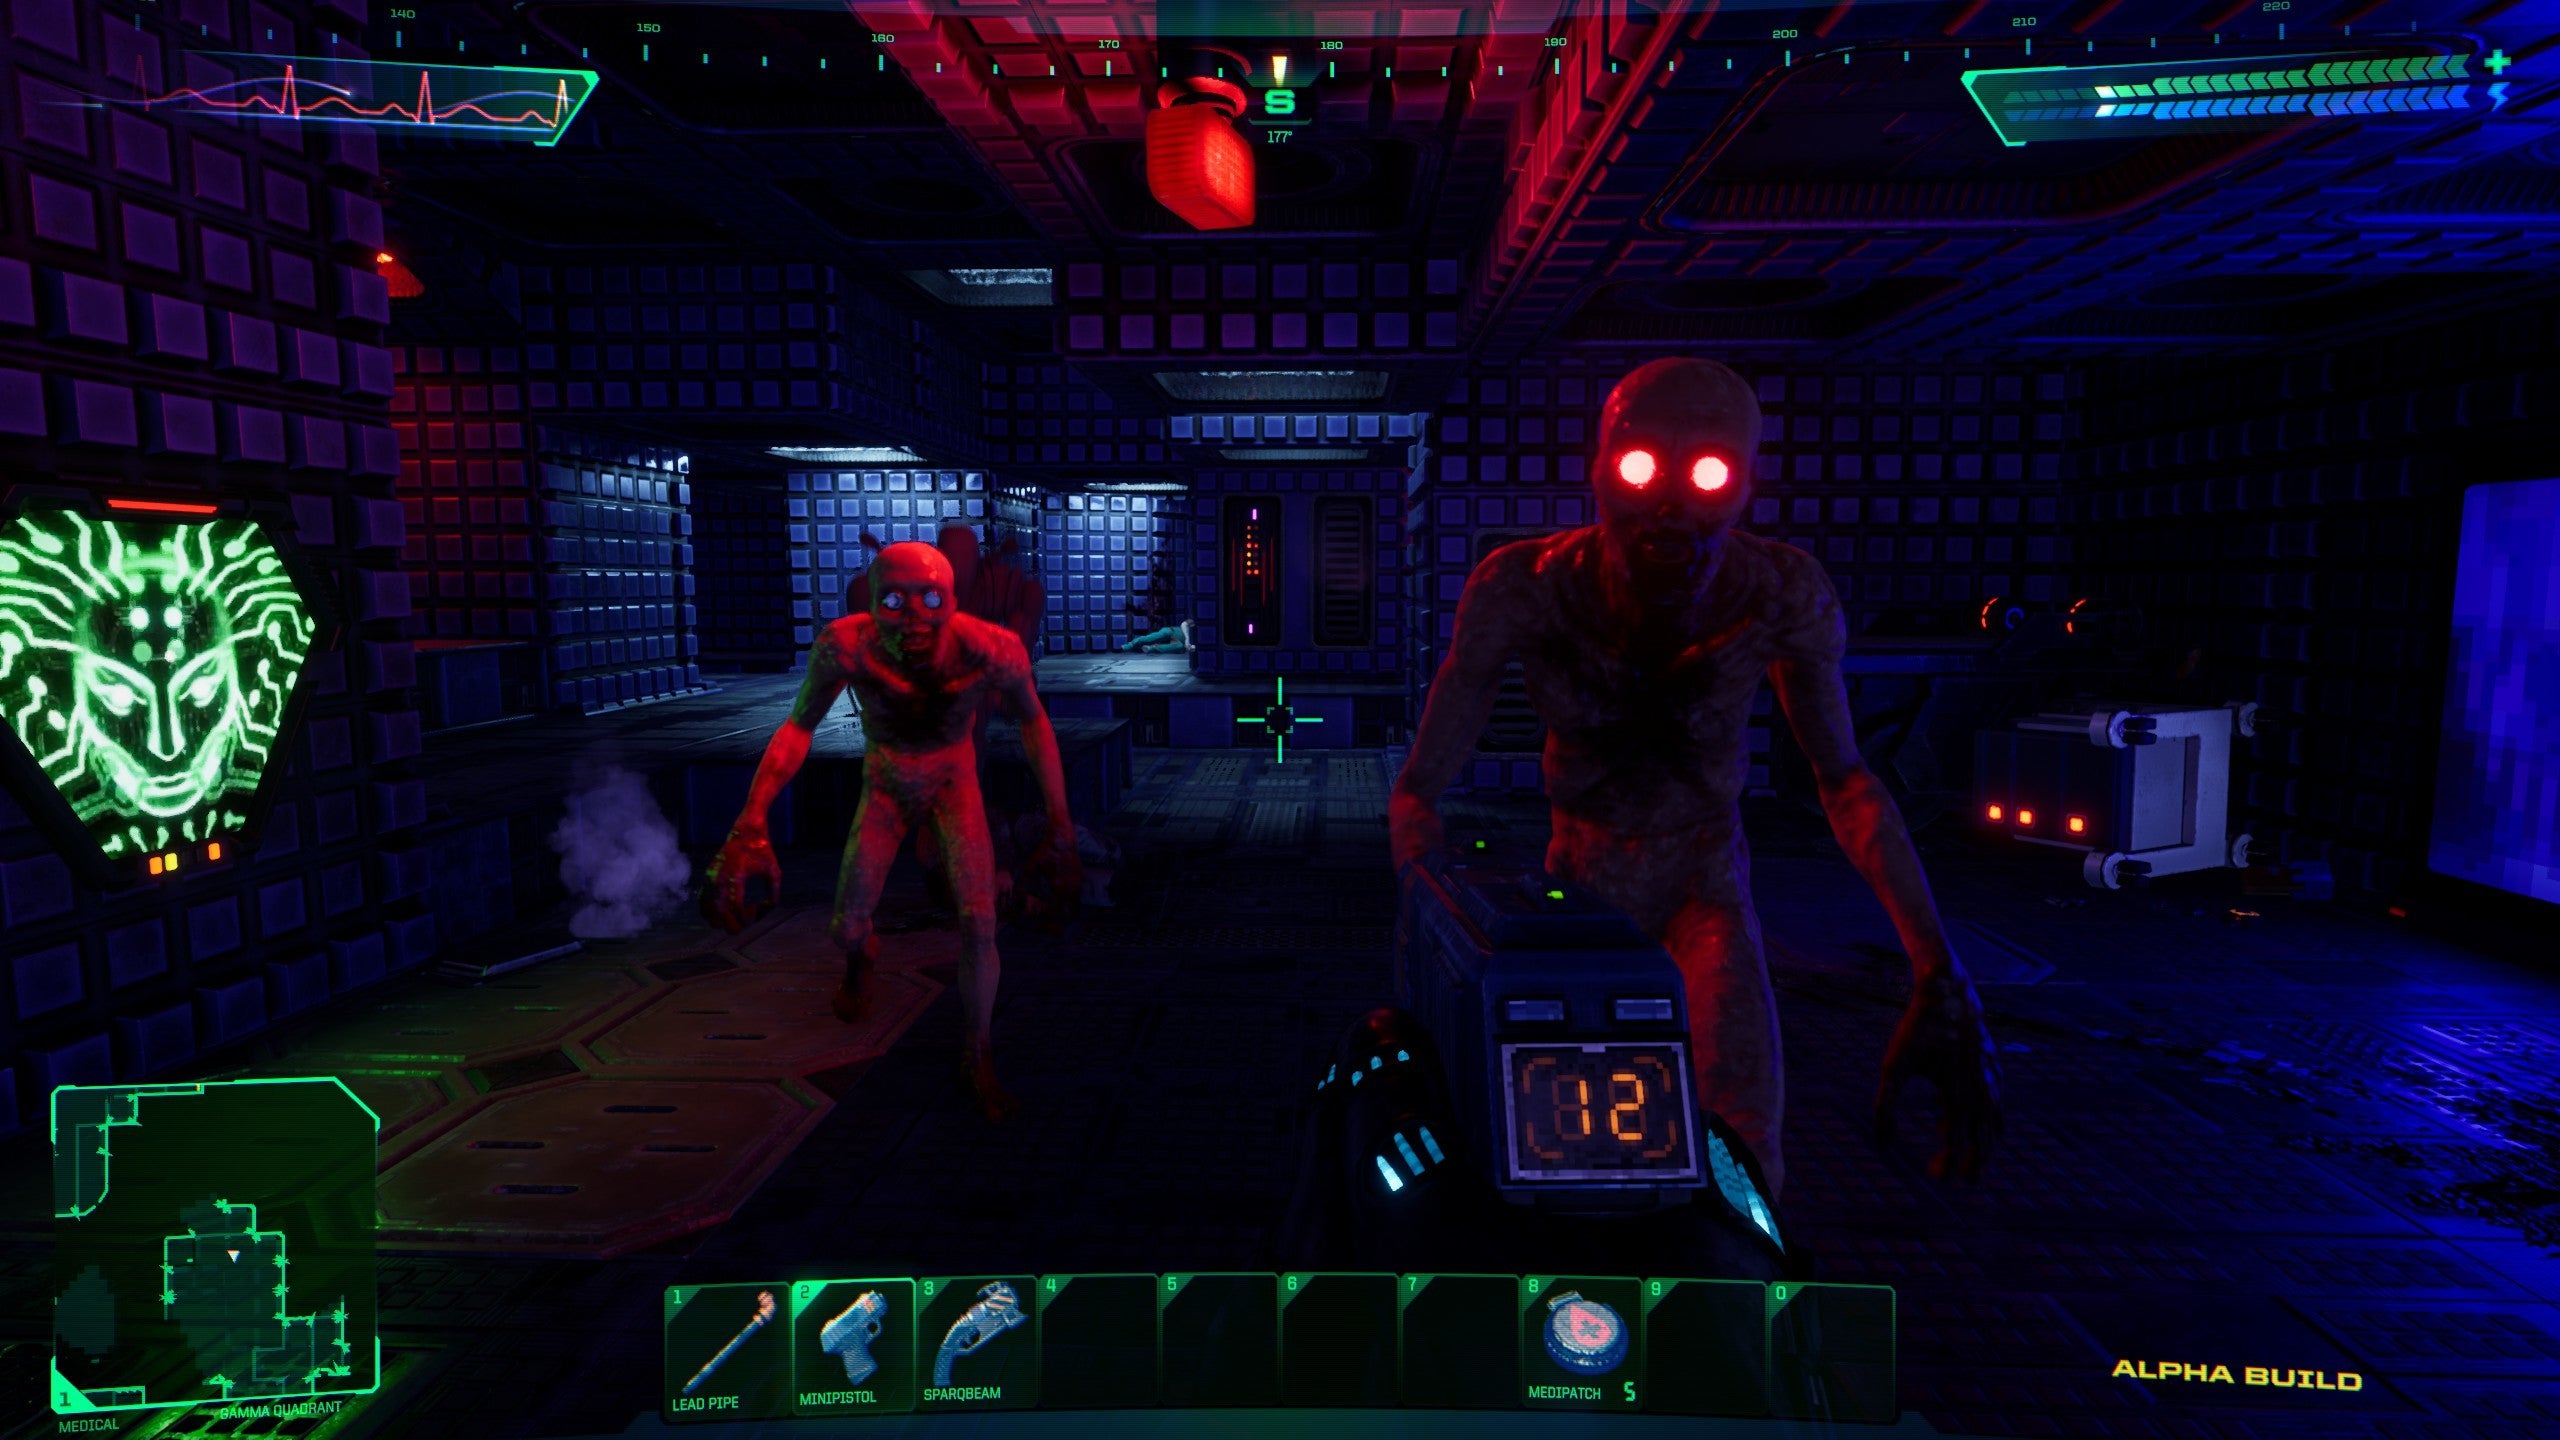 A screenshot of the System Shock remake, showing a metal corridor bathed in red light and in the foreground two zombie-like enemies rushing toward the player.